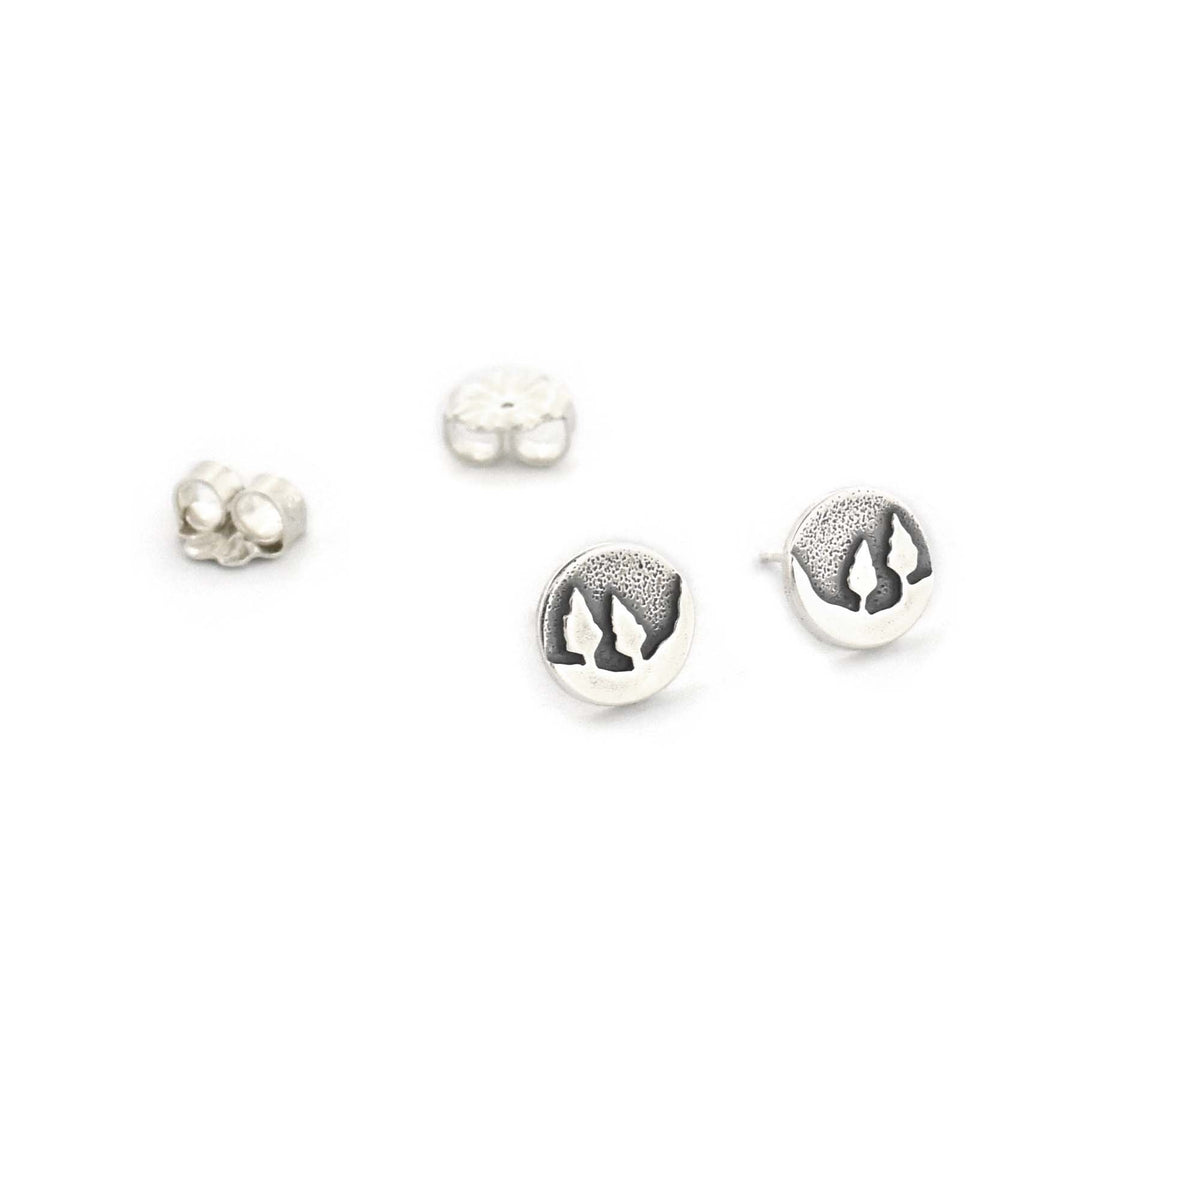 5 Pair Replacement Rubber Earring Backs - Beth Millner Jewelry